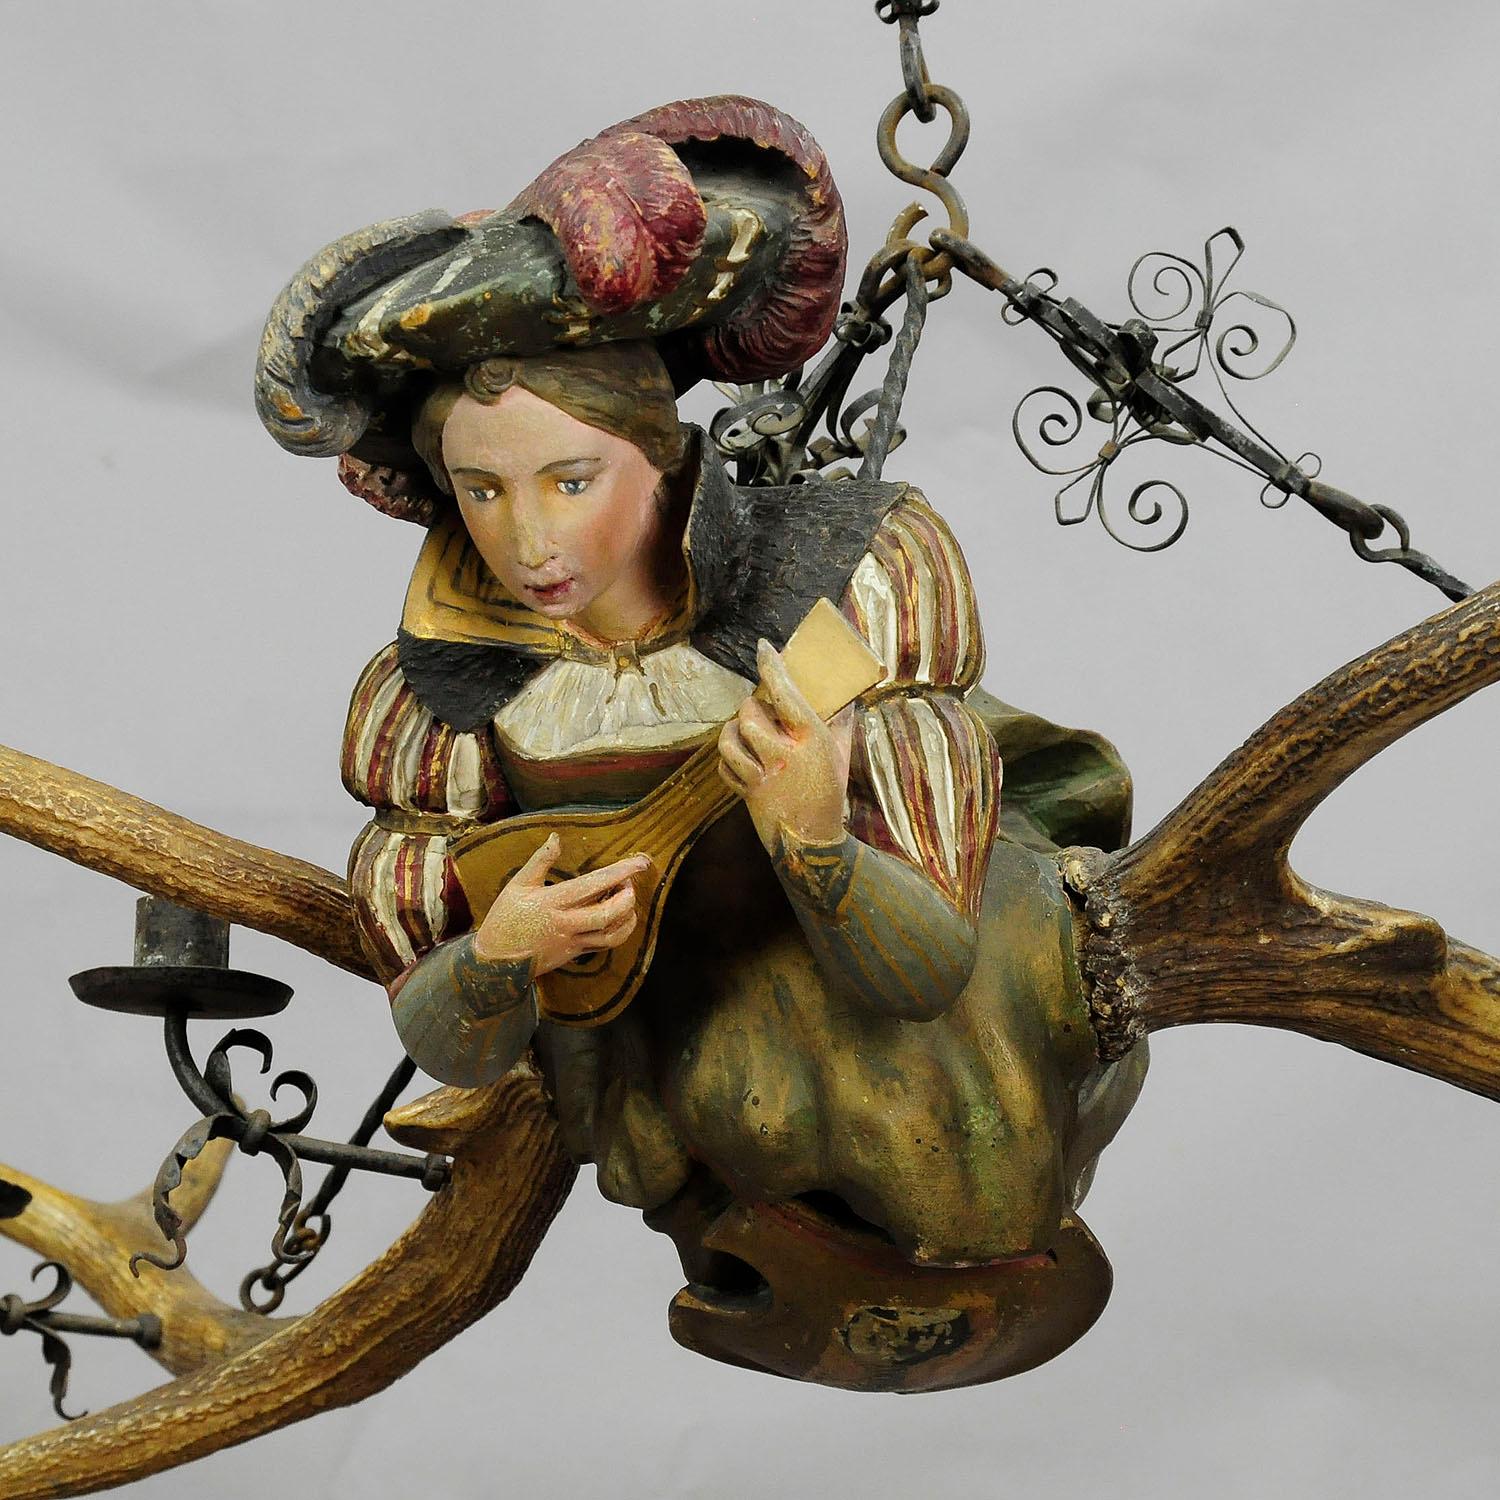 A small wooden carved antique Lüsterweibchen chandelier with a medieval lady playing the lute, original deer antlers, four hand-forged iron spouts for candles and a hand-forged suspension. Executed, circa 1890.

Measures: Length 33.46